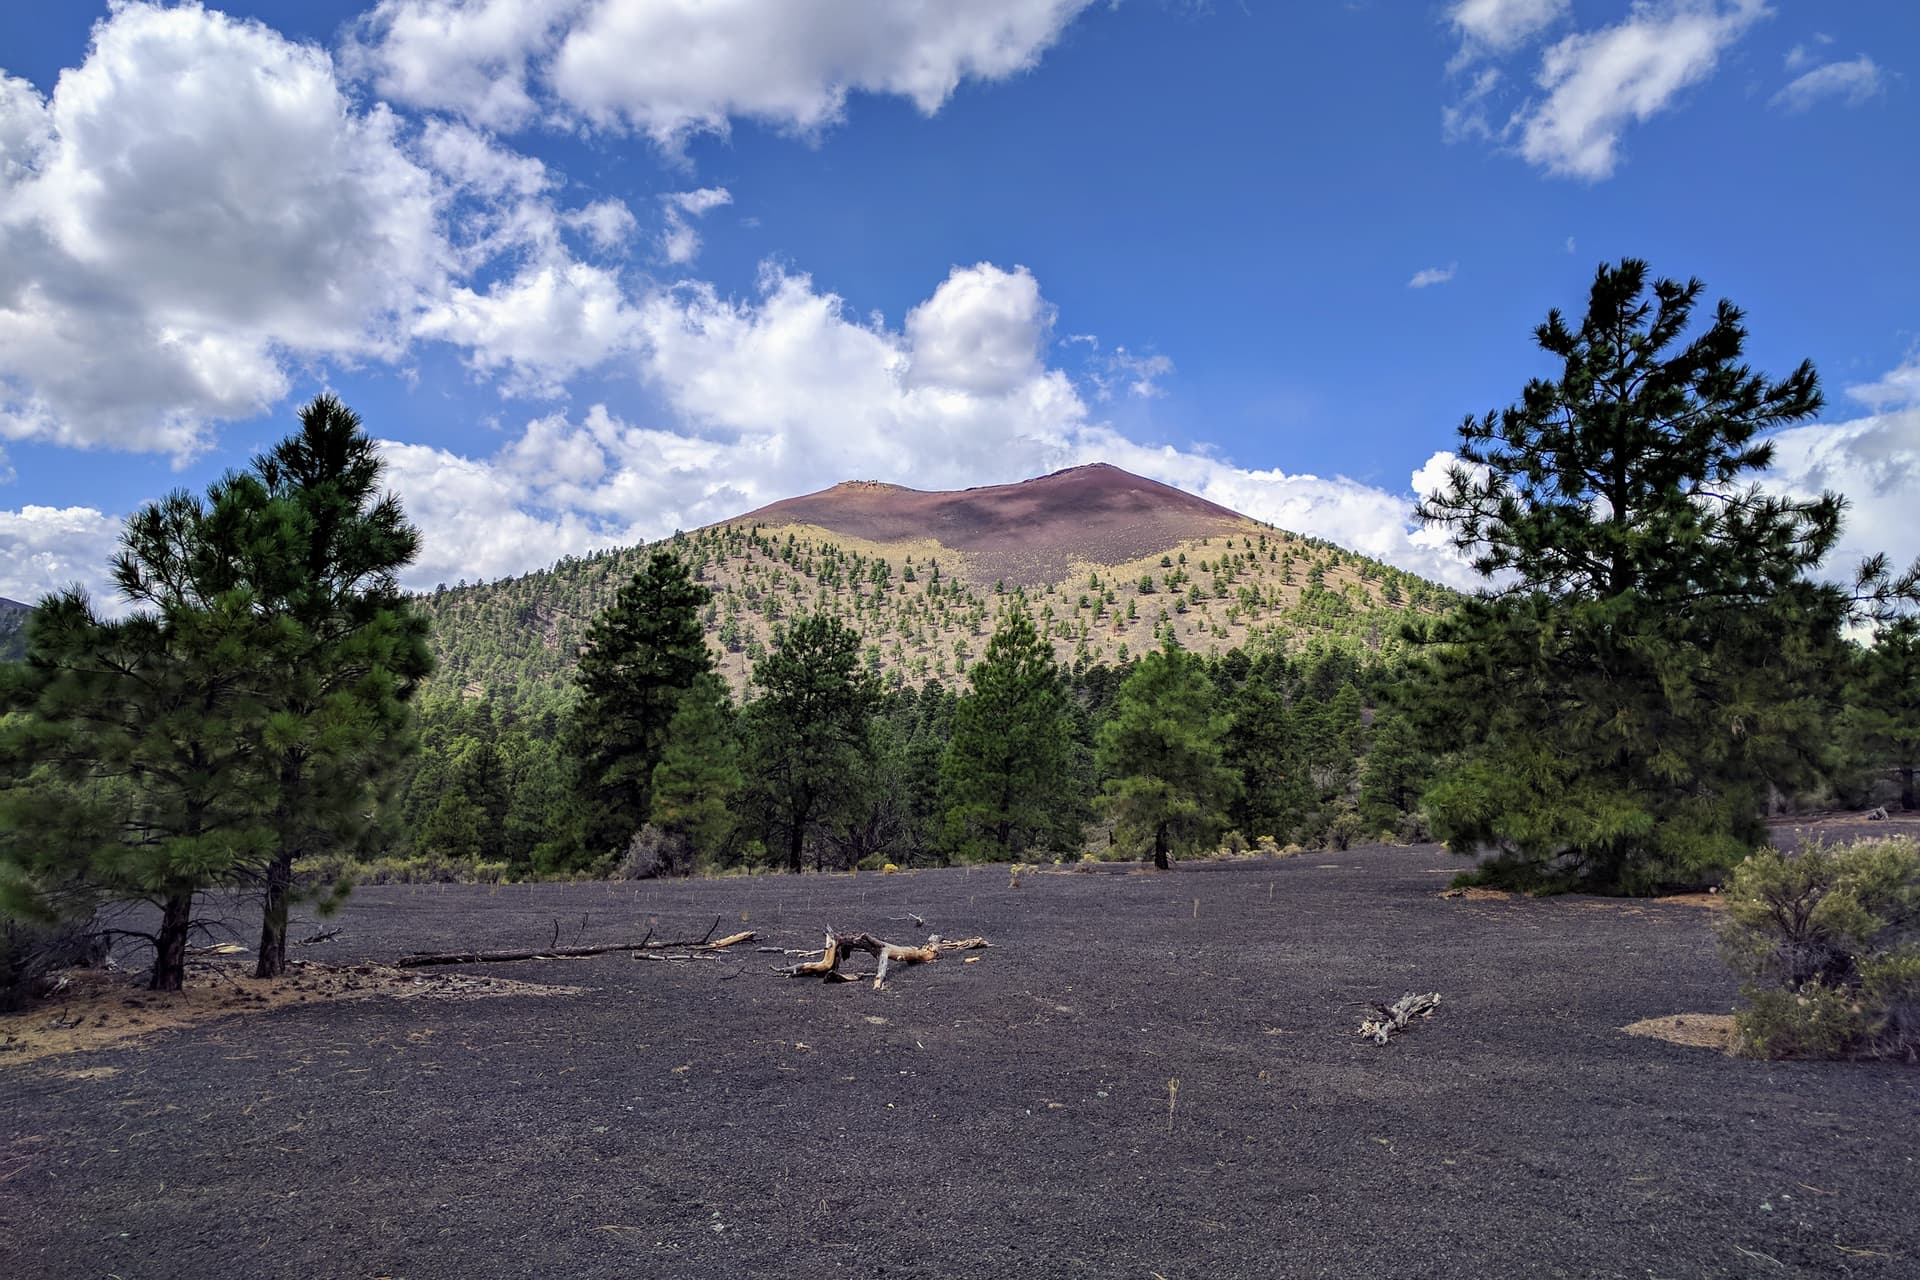 A clearing in a pine forest. The ground is covered in fine volcanic cinders. Beyond the clearing, a steep cinder cone with a distinctive red crater rim.